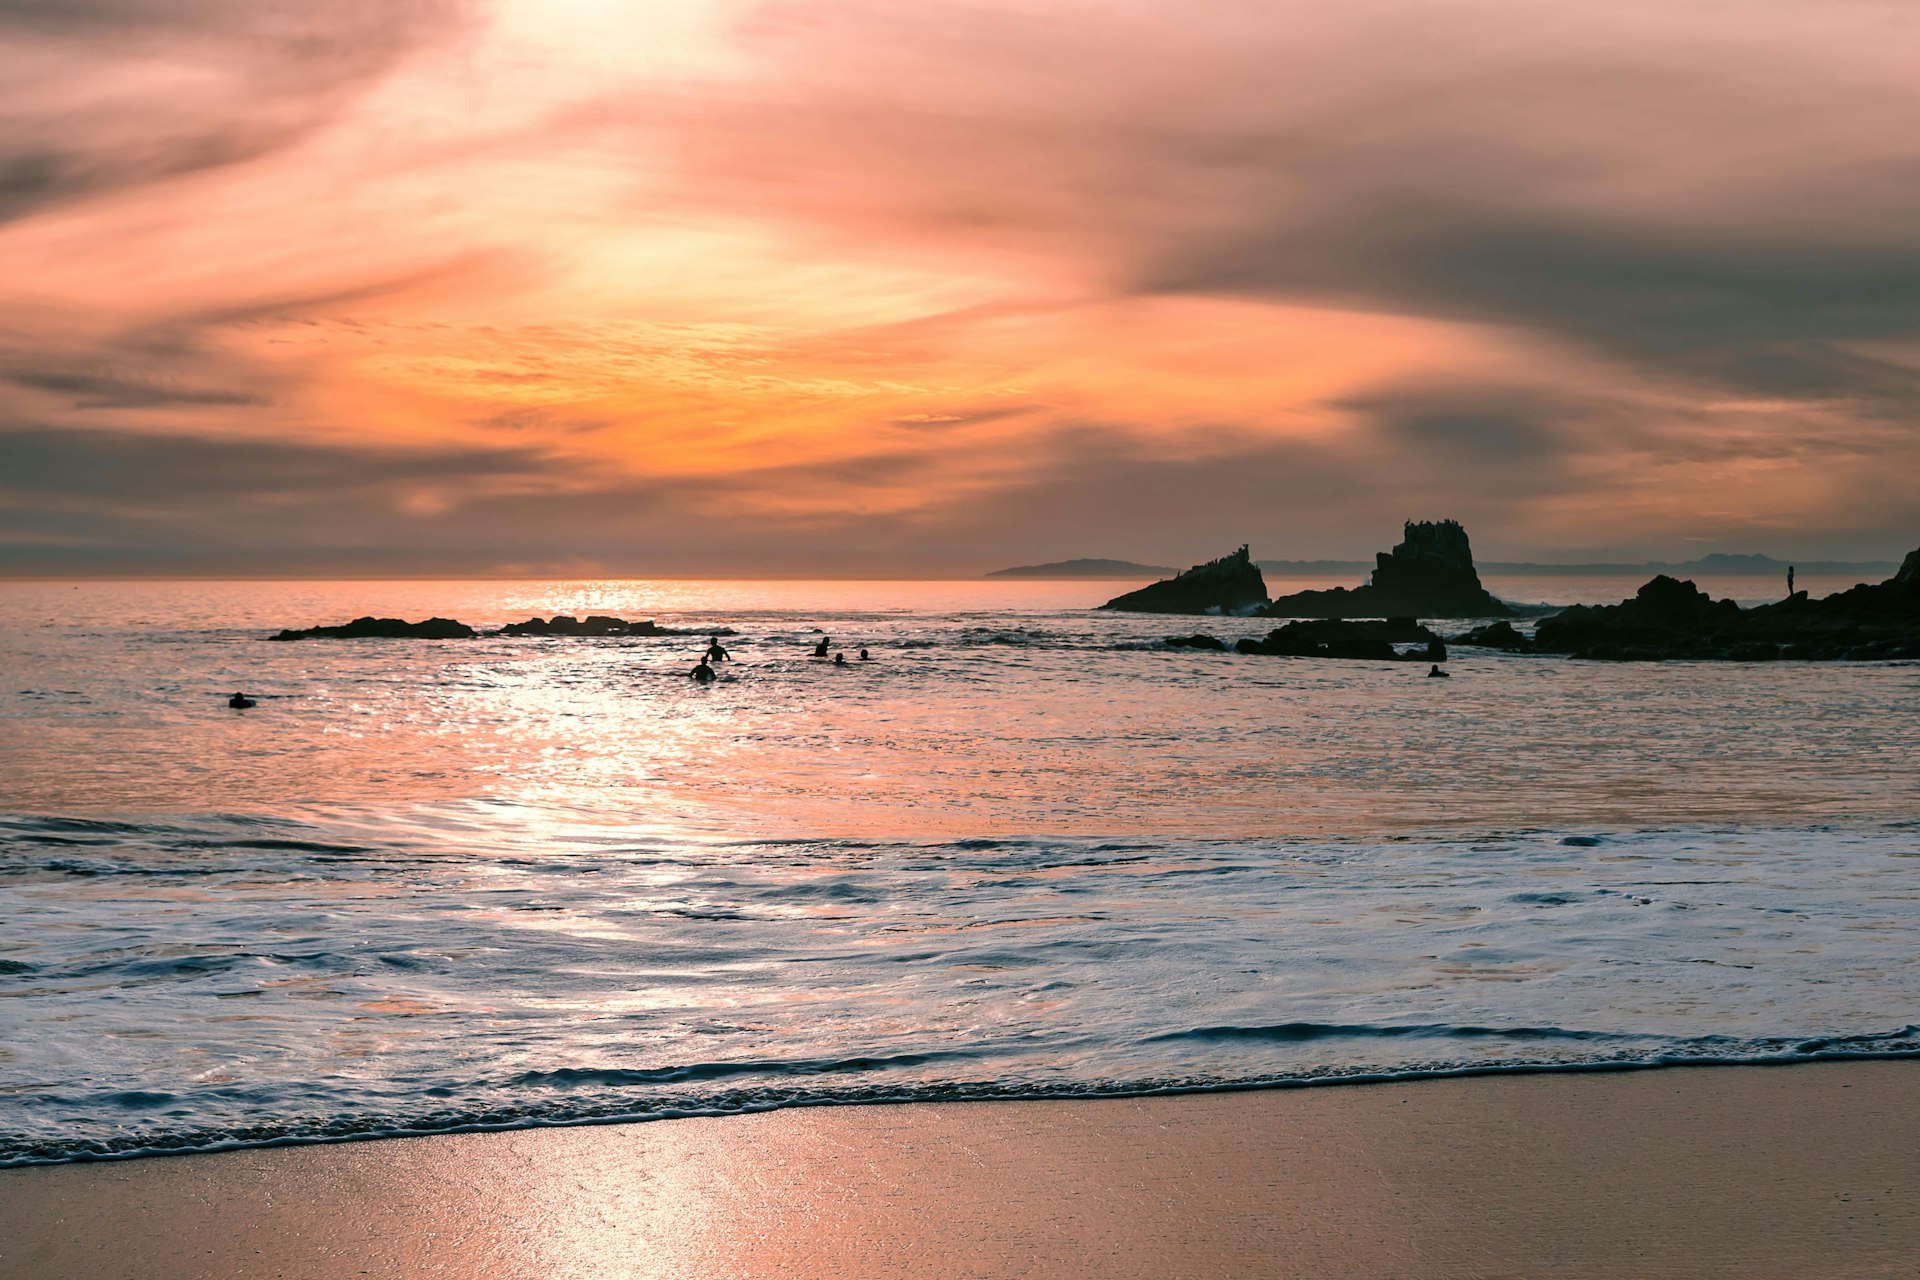 A small group of surfers on their boards in the water waiting for waves during sunset at Crescent Bay in Laguna Beach, CA